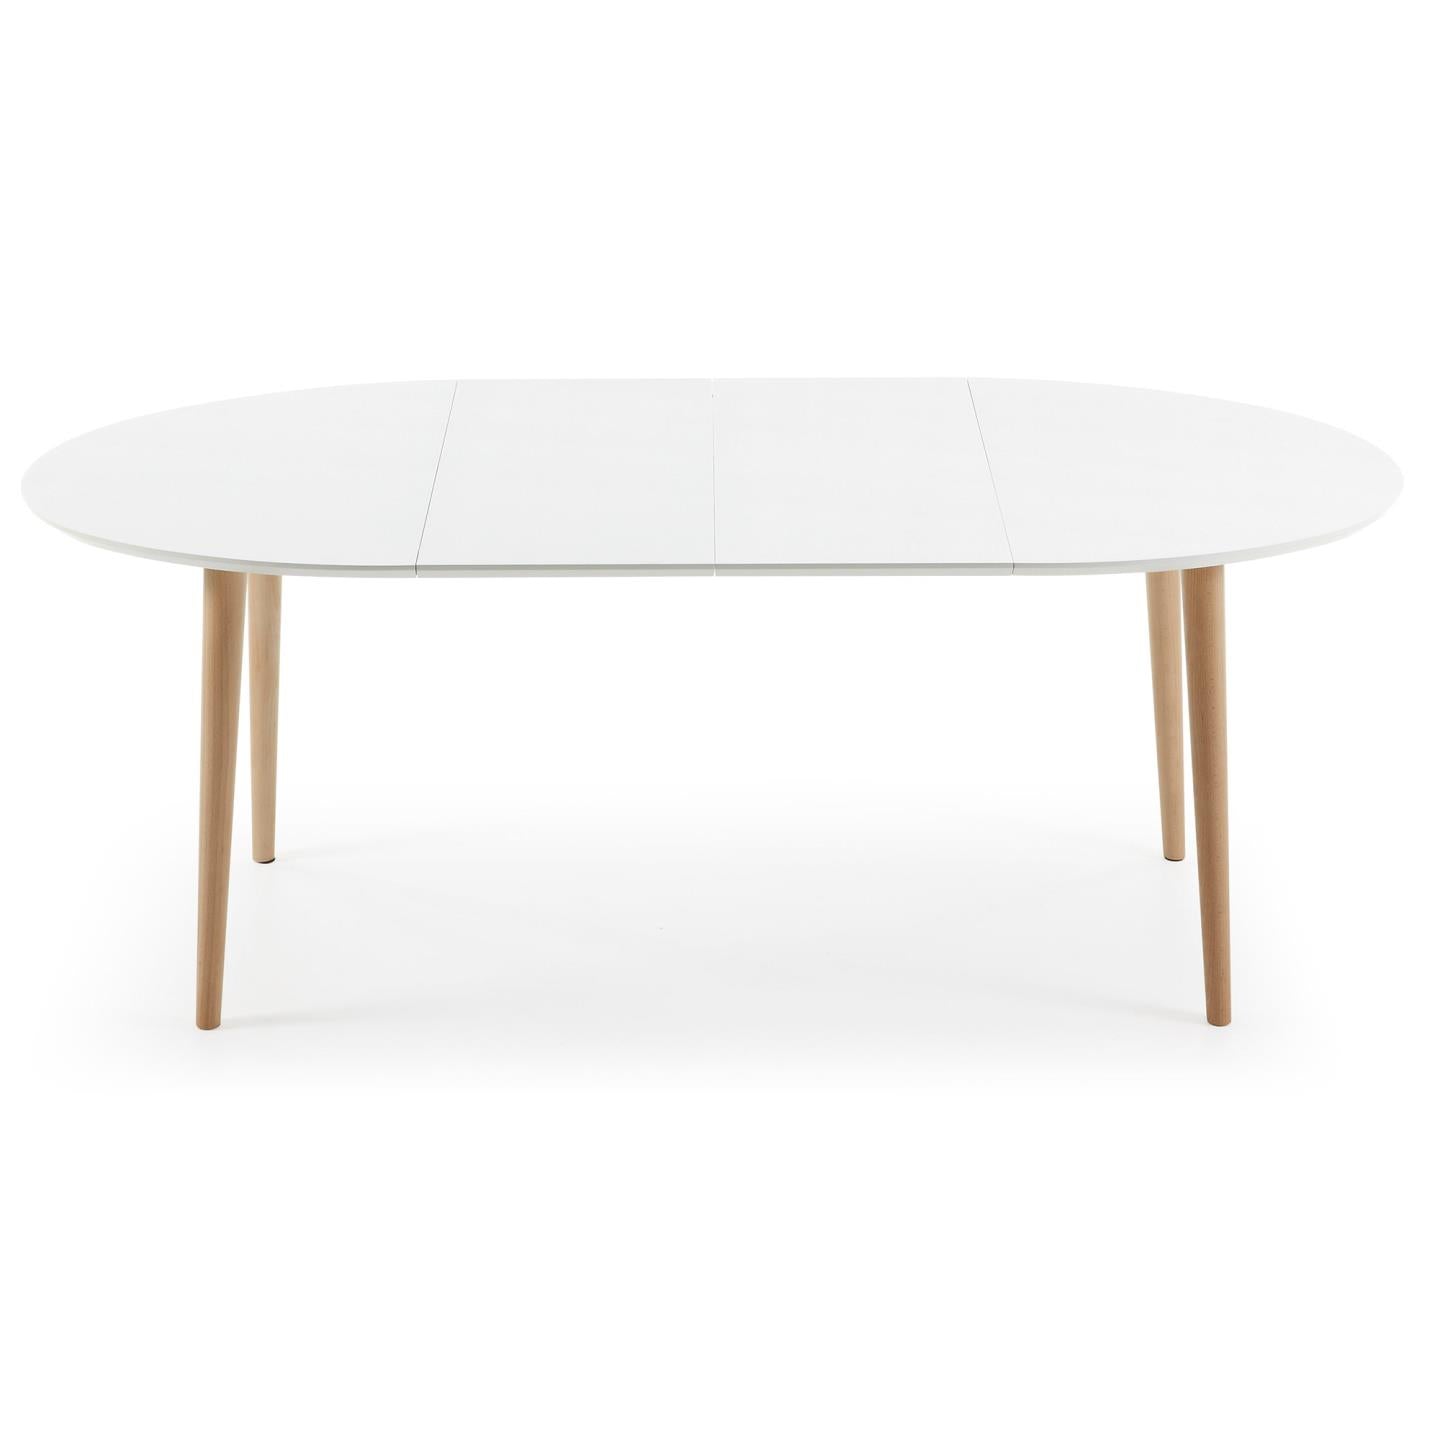 Oqui oval extendable MDF table with white lacquer and solid beech legs 120 (200) x 90 cm